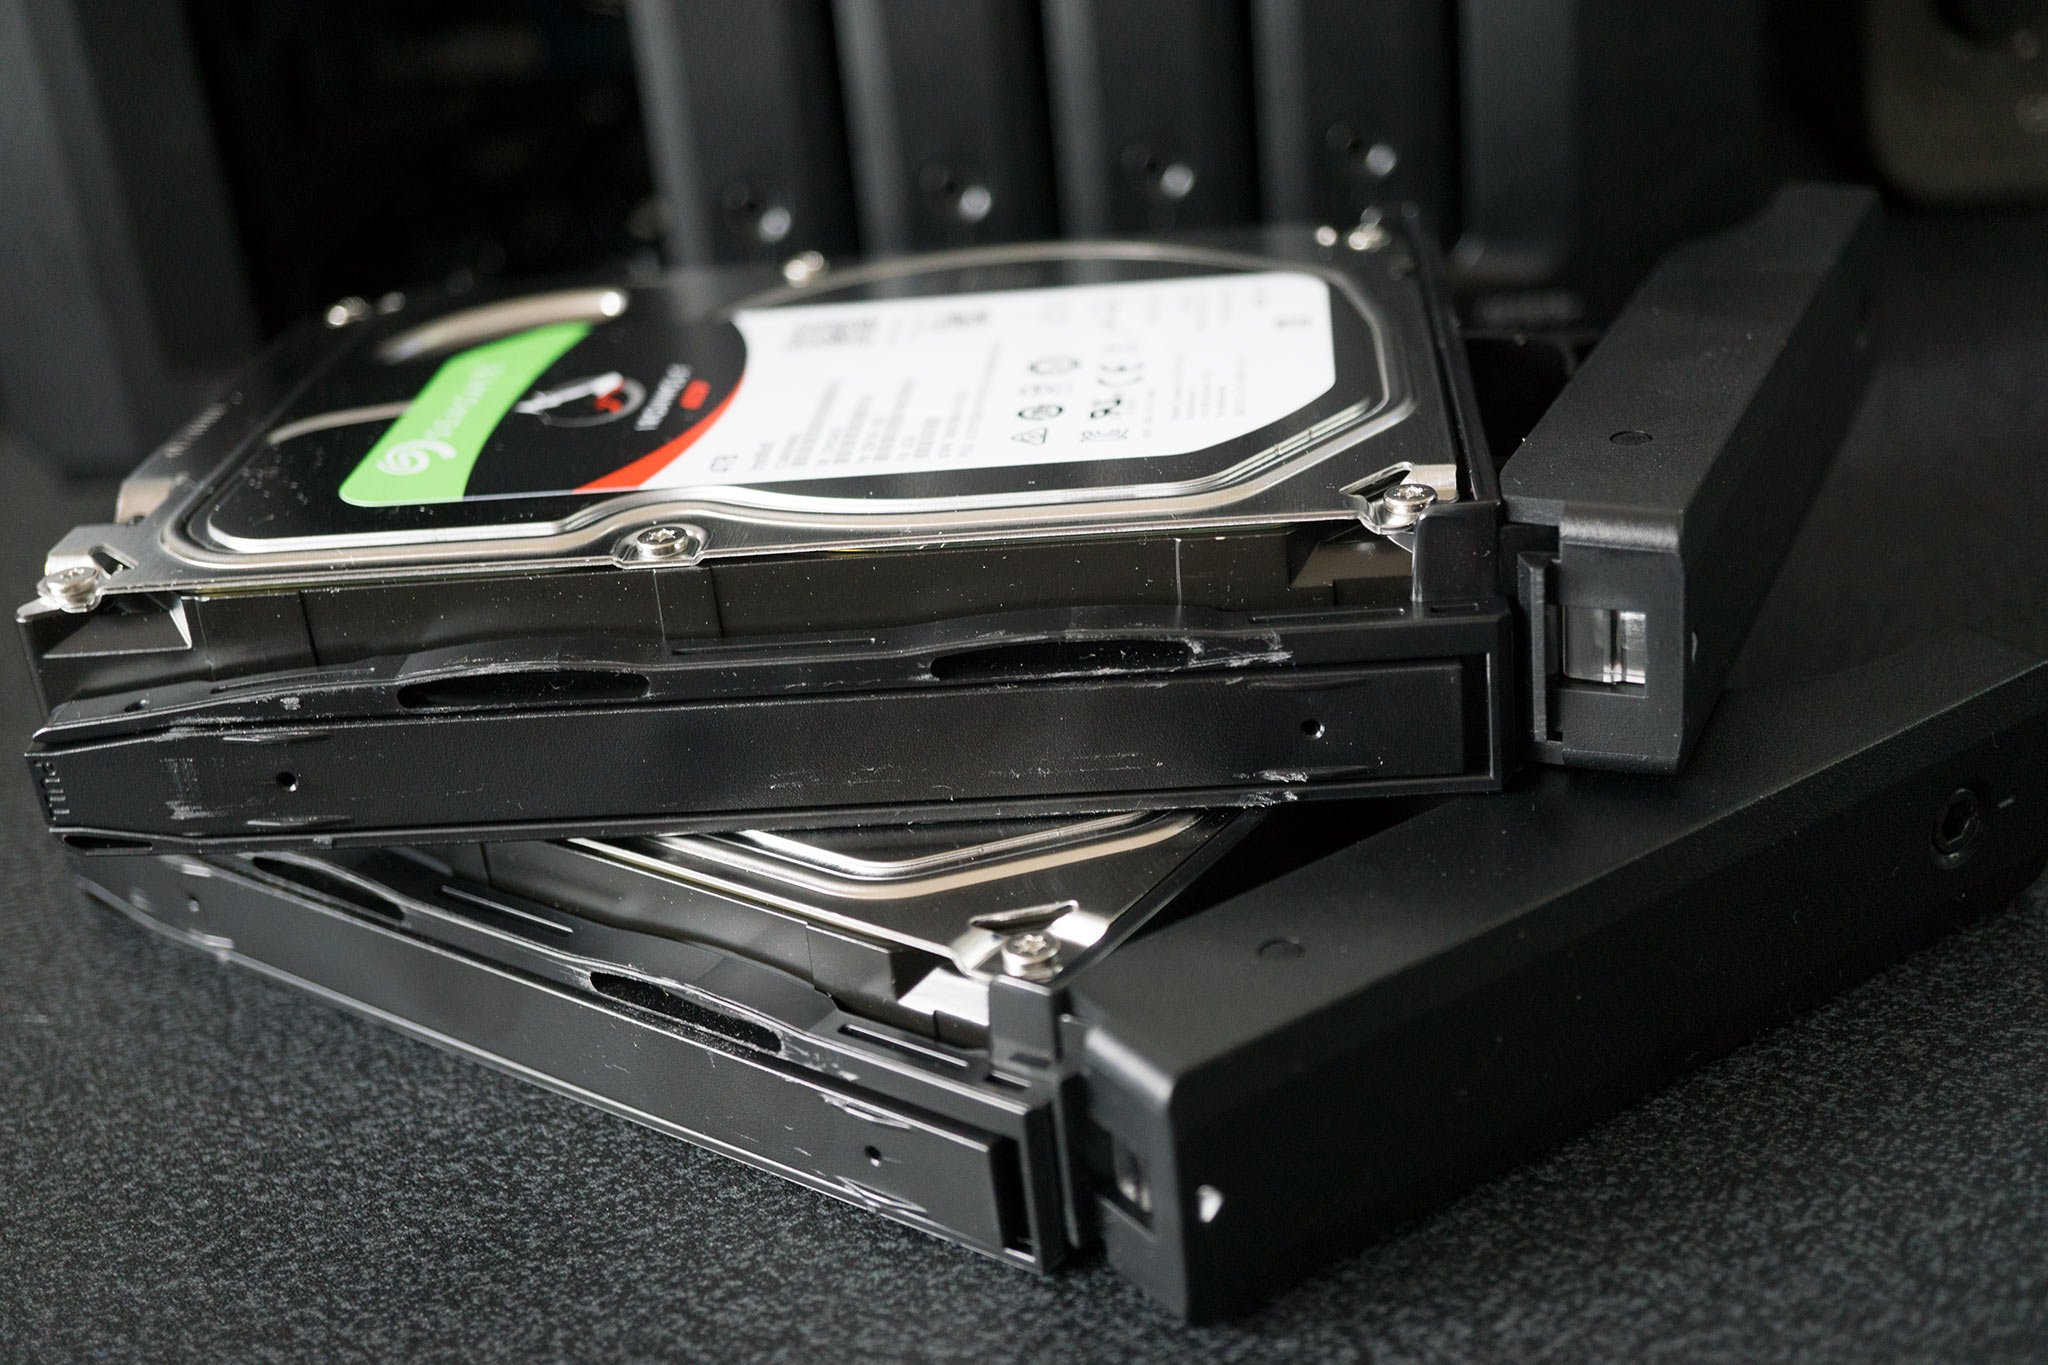 Store all the things with an 8TB Seagate IronWolf hard drive for £150